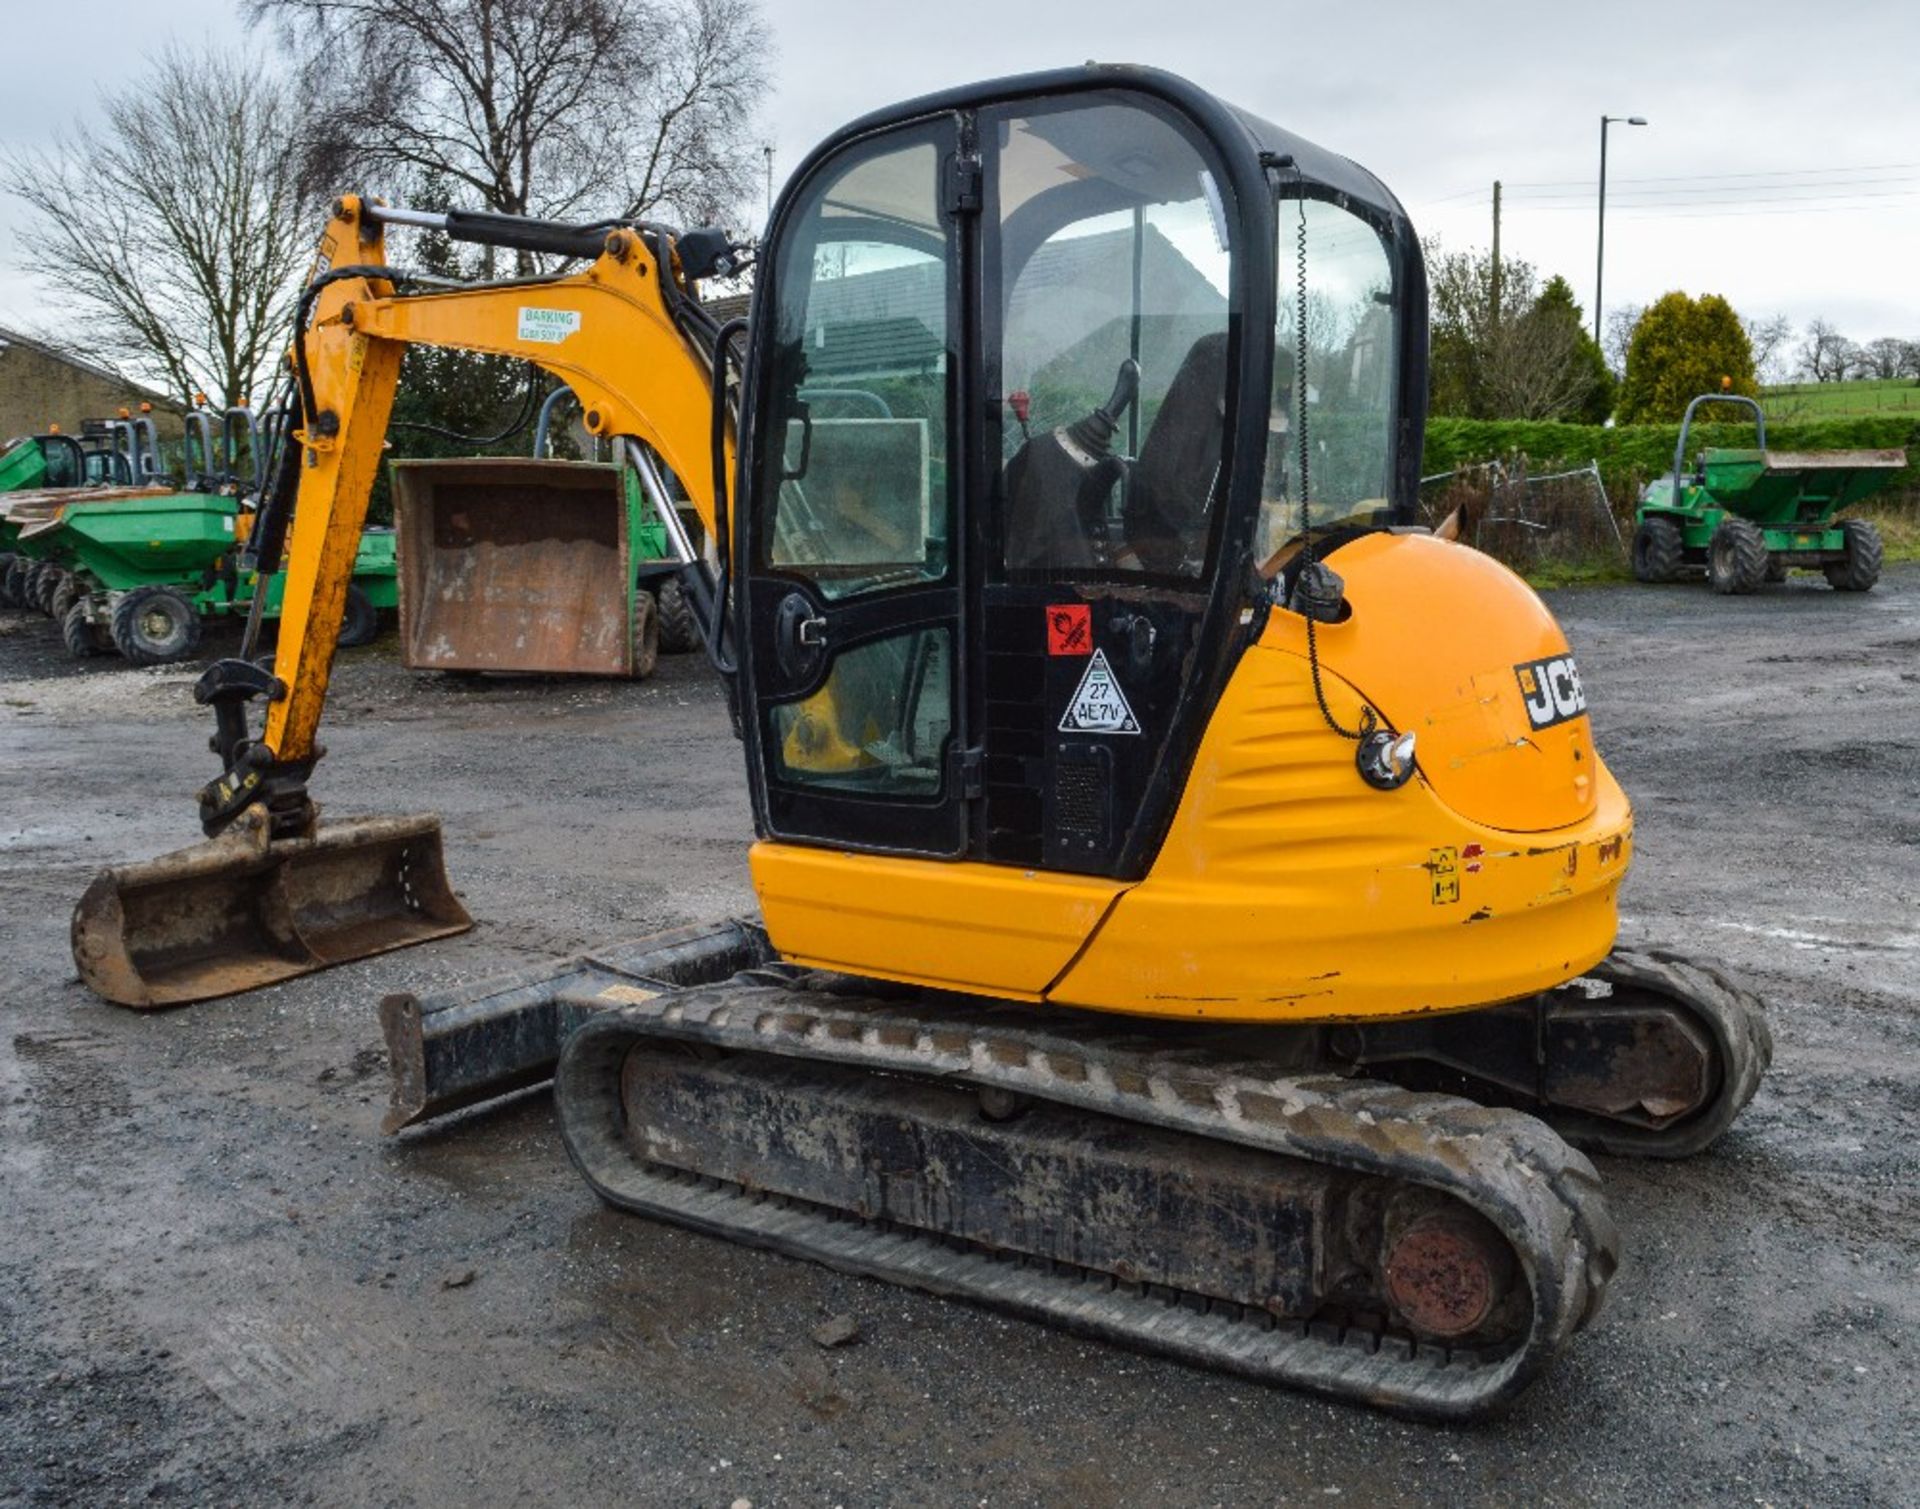 JCB 8050 RTS 5 tonne reduced tail swing rubber tracked mini excavator
Year: 2011
S/N: 1741664 - Image 2 of 12